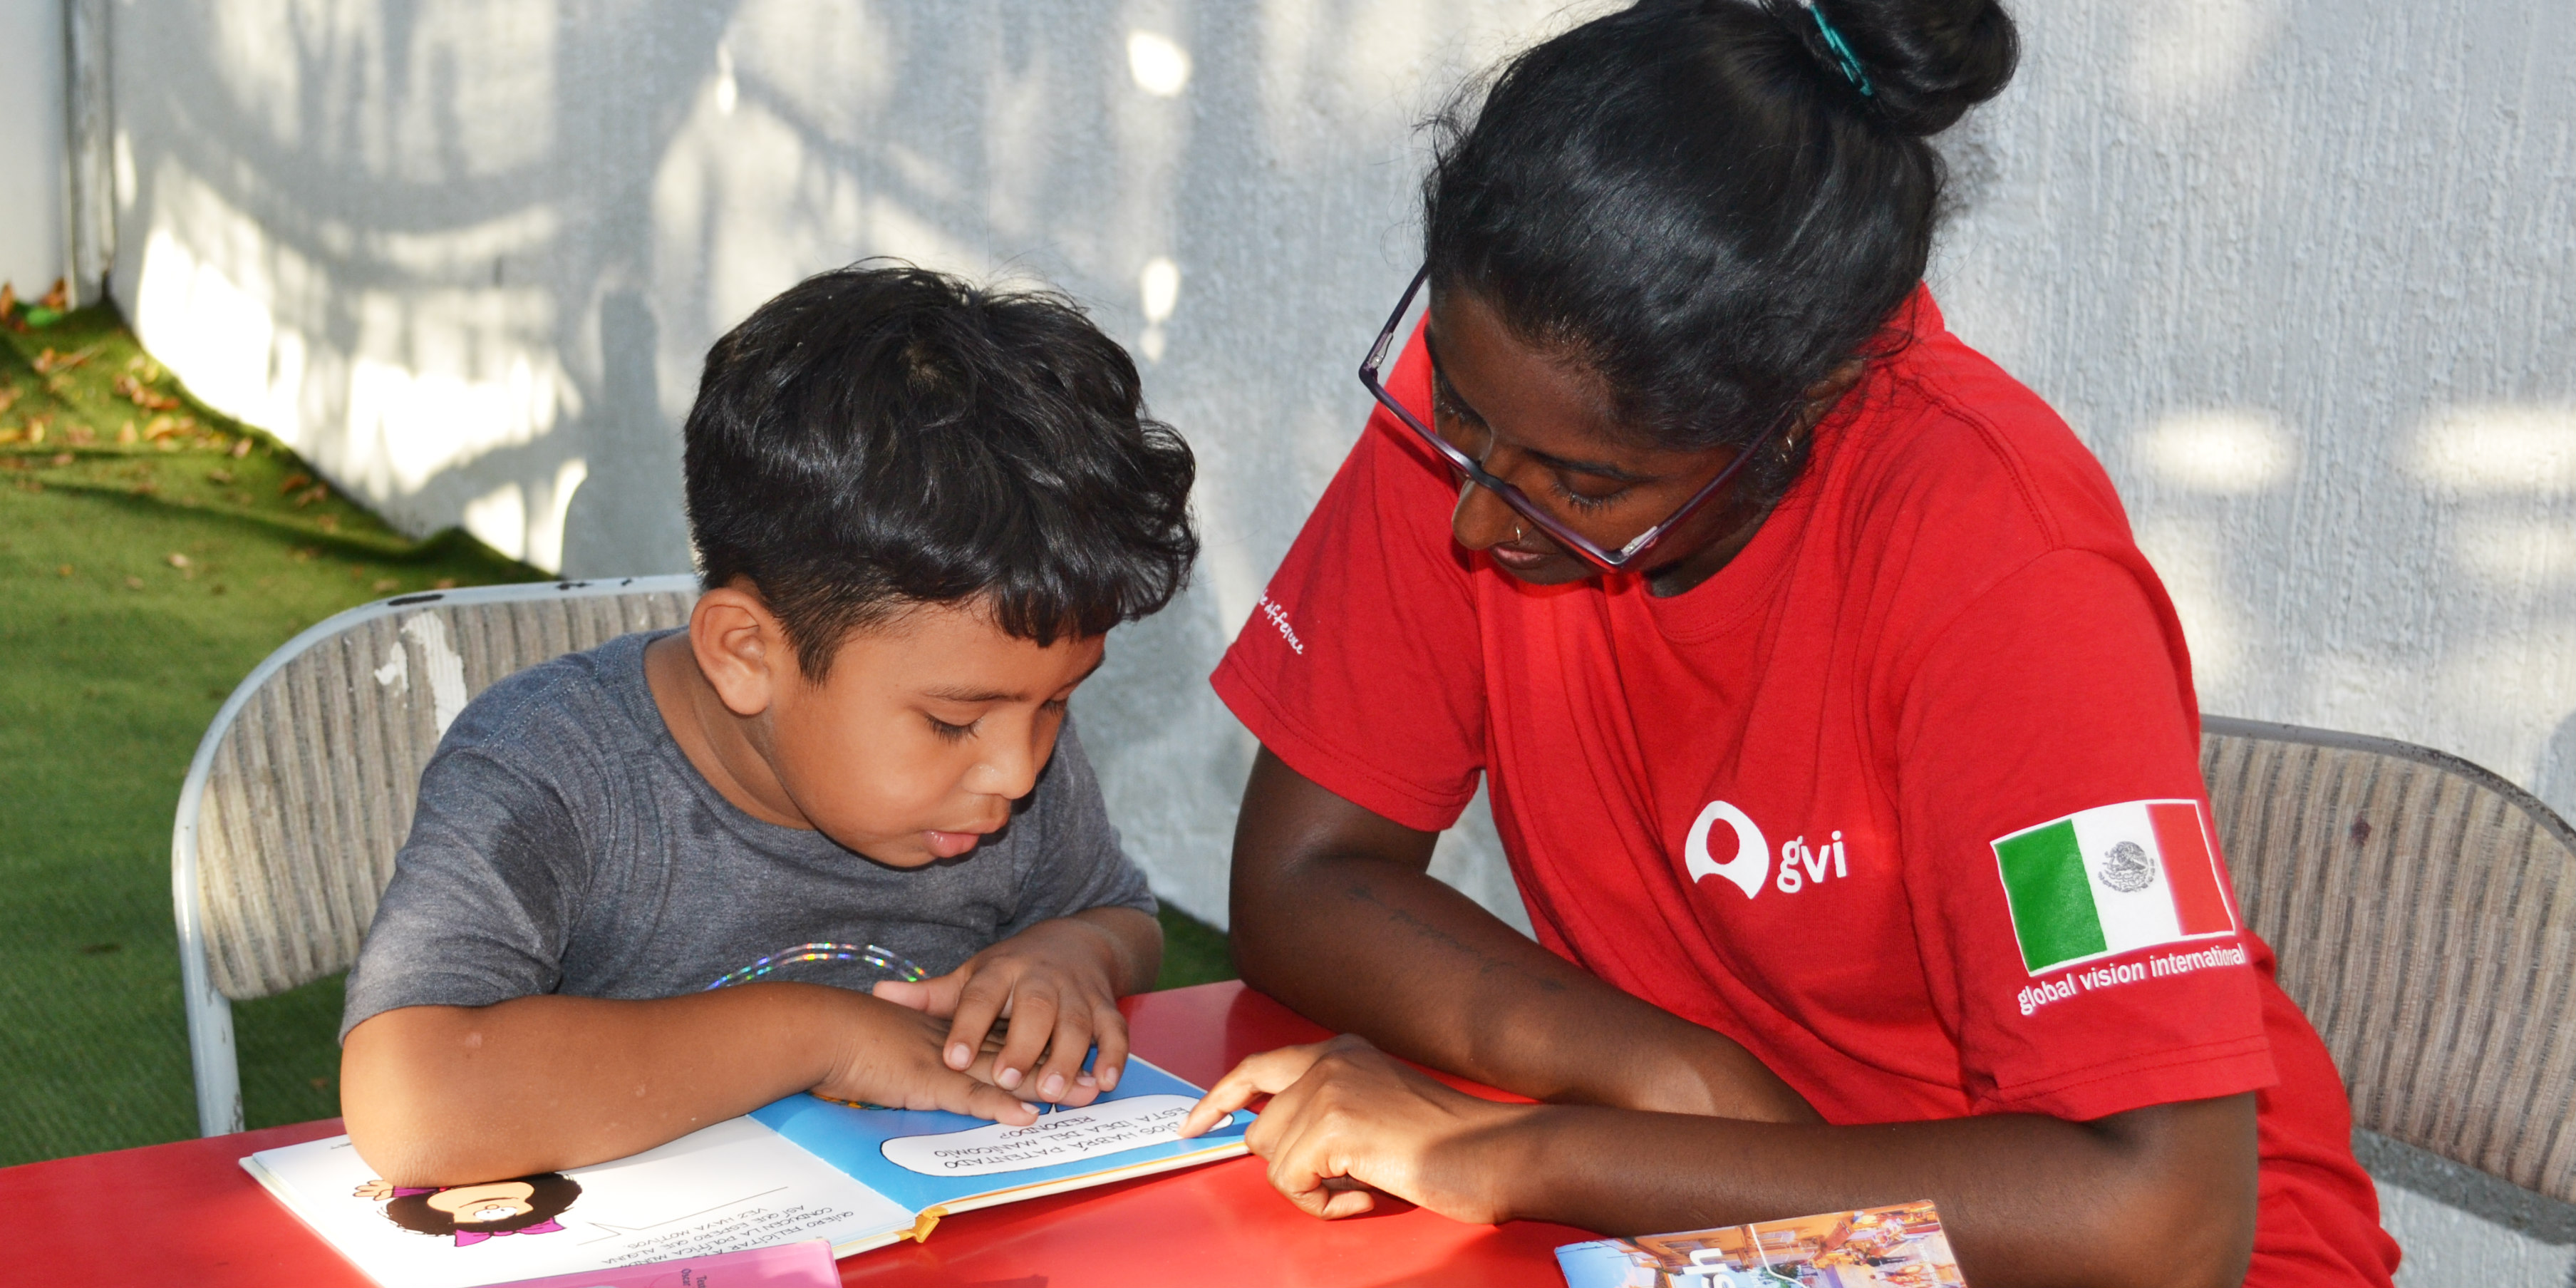 A GVI participant works with a child on their reading, while volunteering in Mexico.